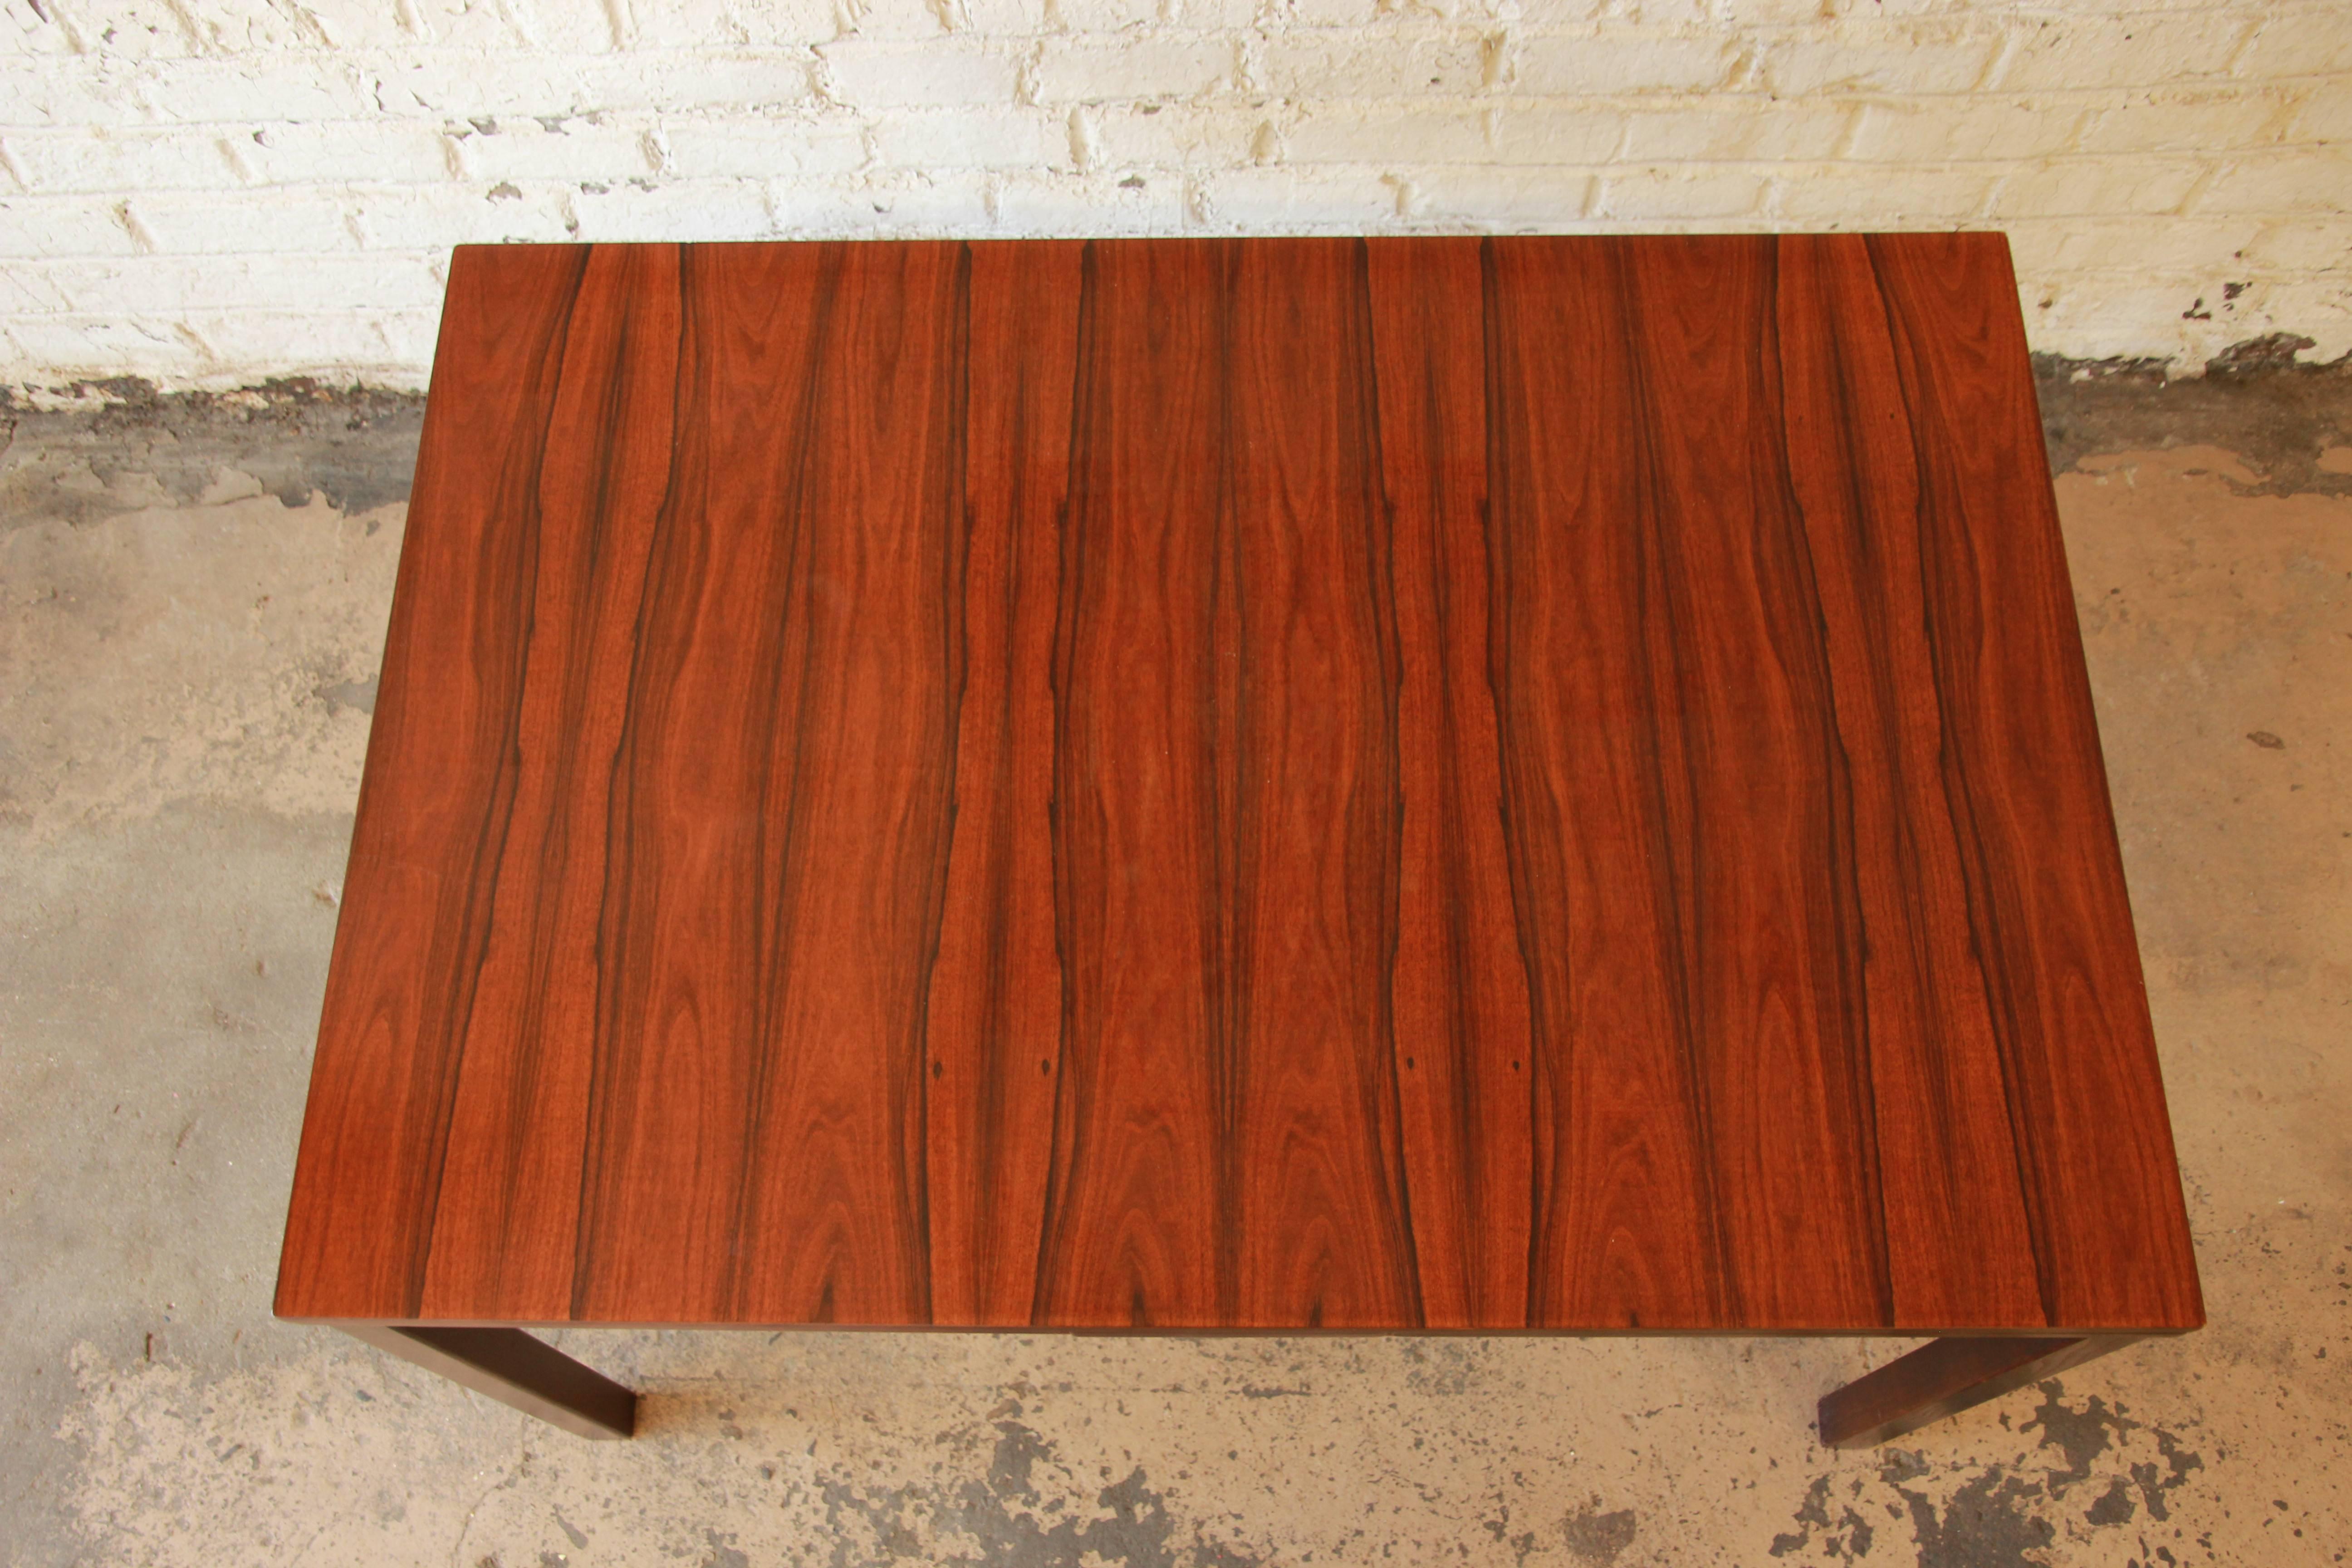 20th Century Norwegian Rosewood Extension Dining Table by Heggen